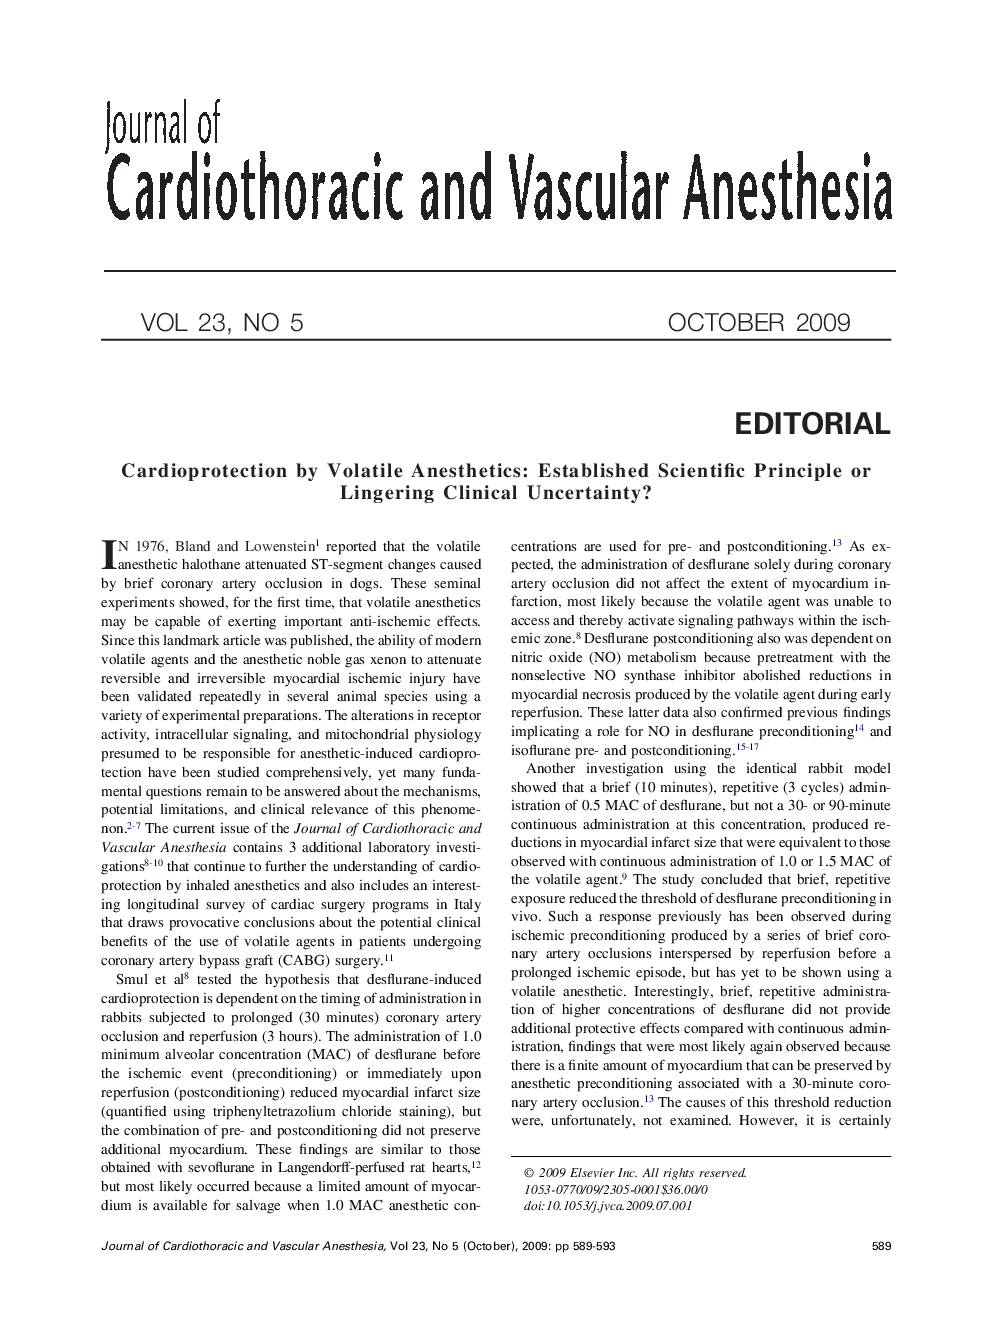 Cardioprotection by Volatile Anesthetics: Established Scientific Principle or Lingering Clinical Uncertainty?